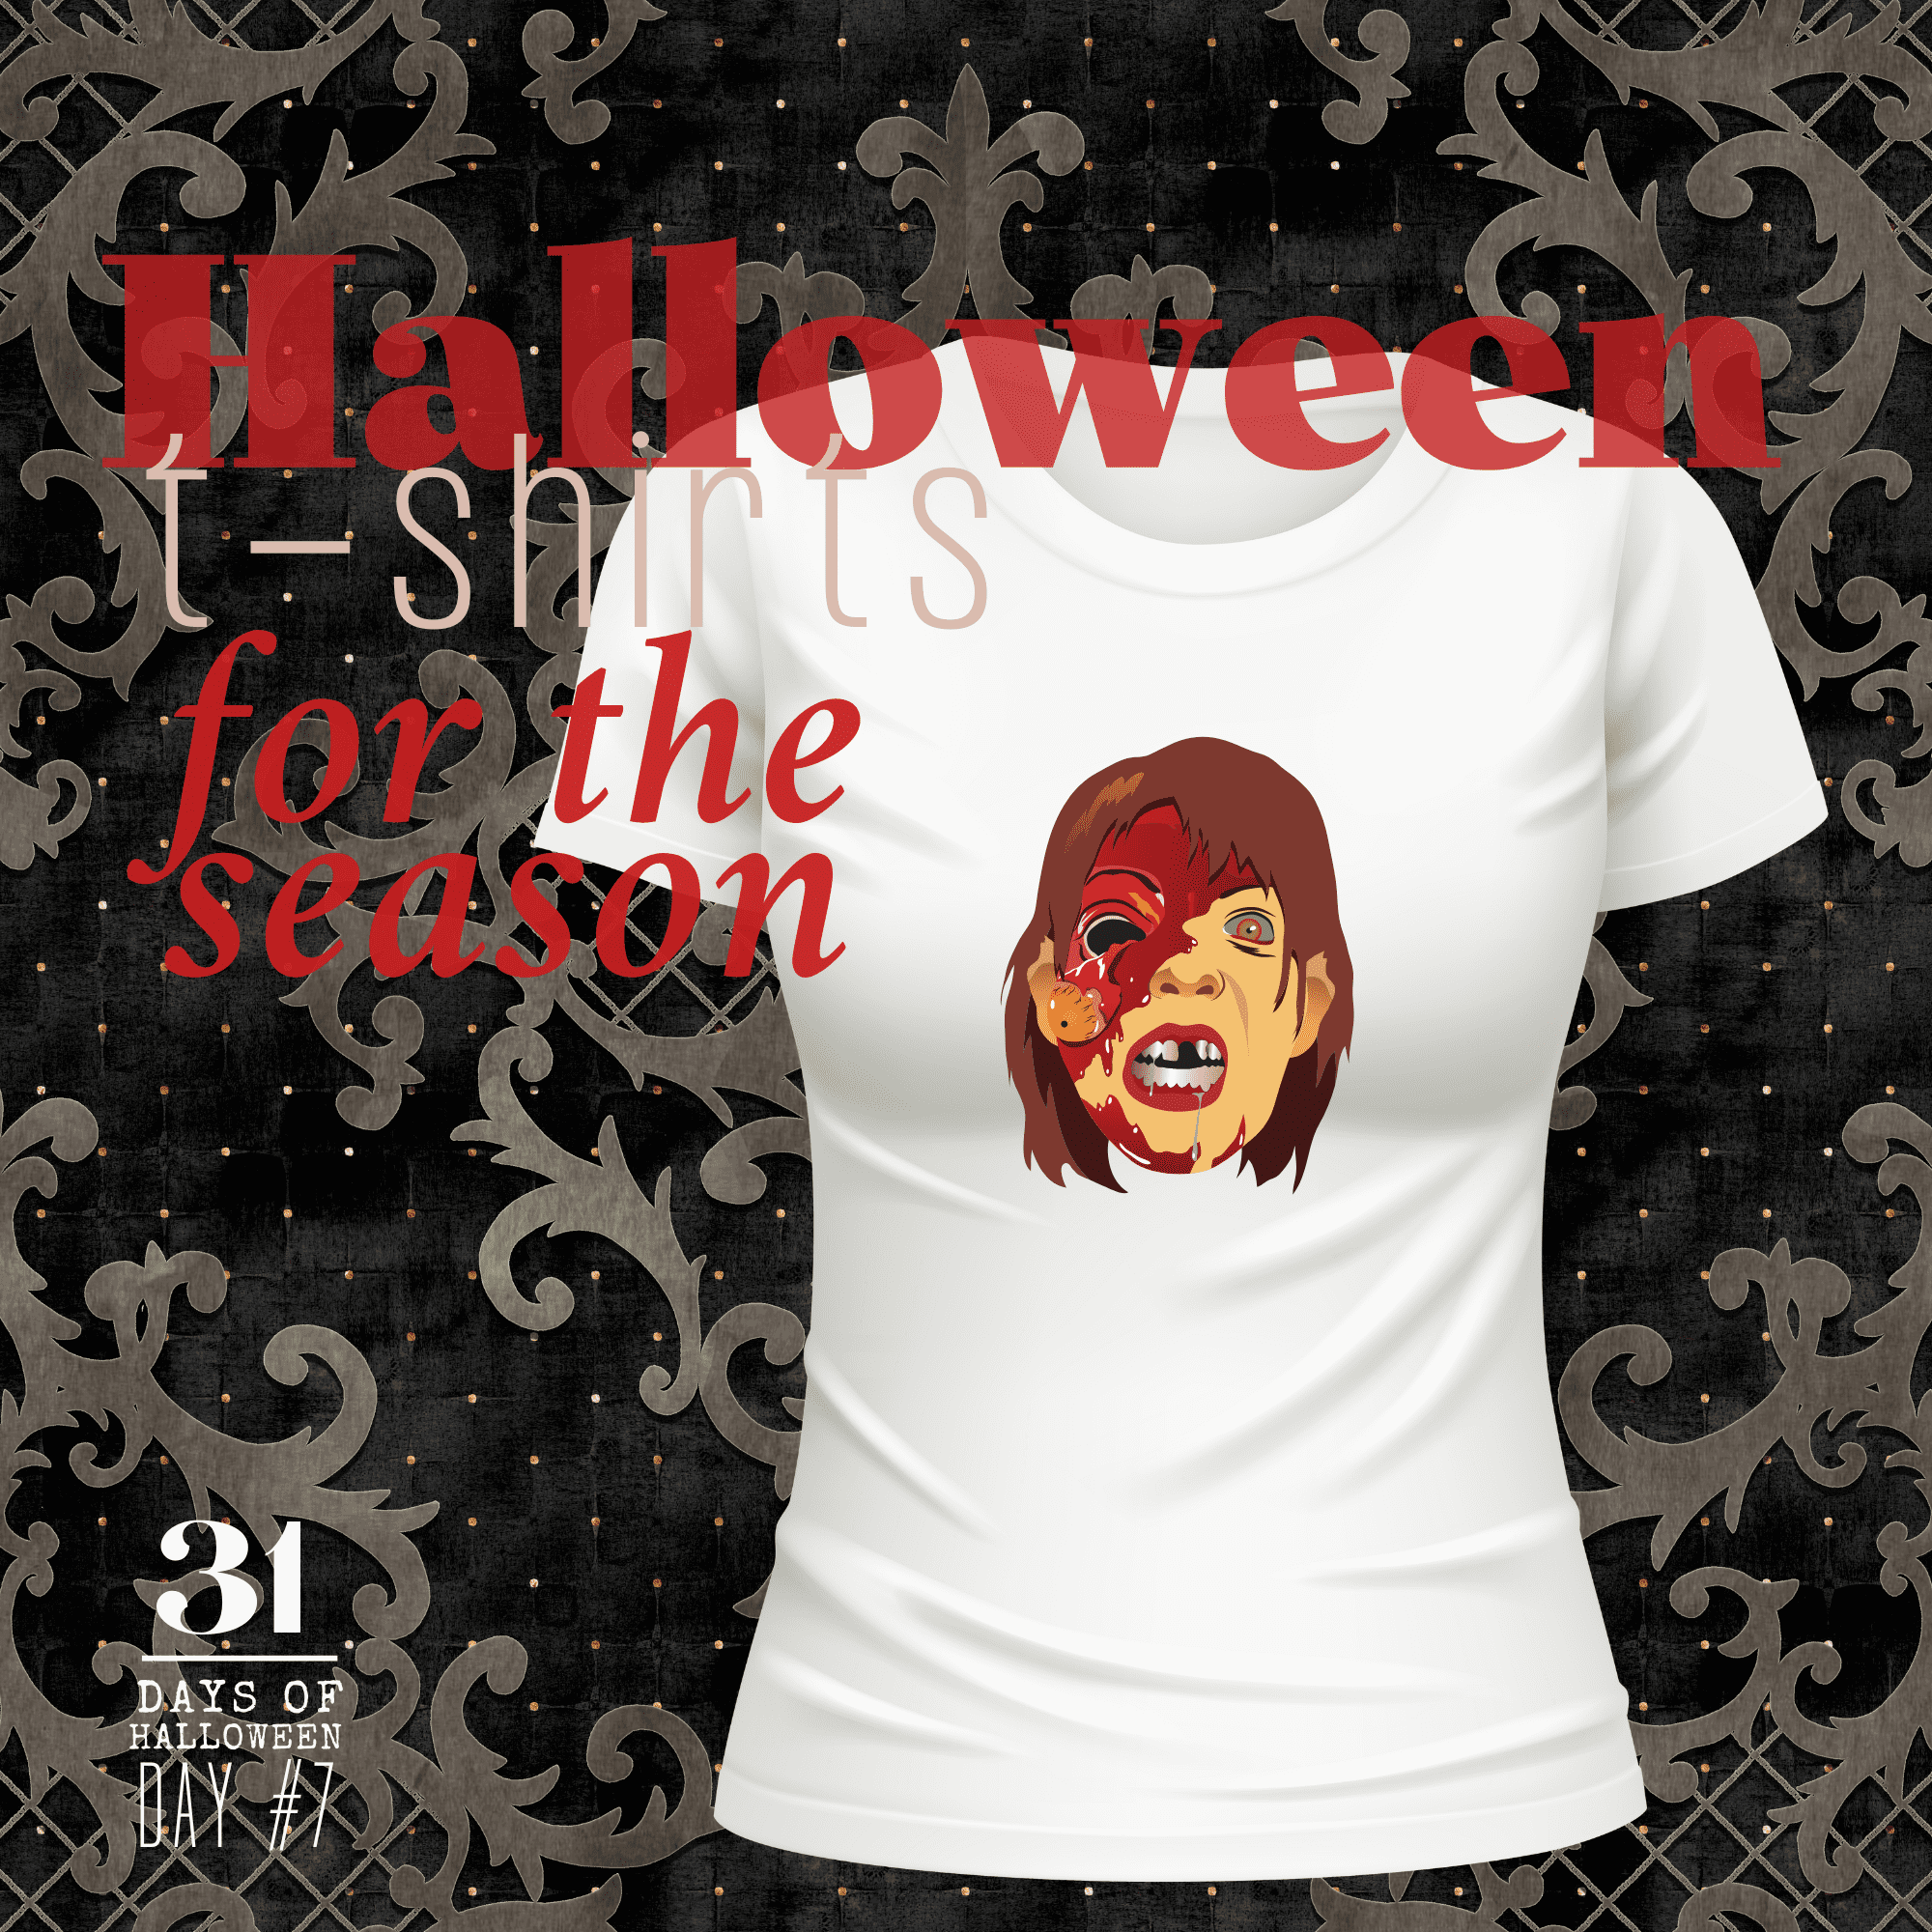 31 Days of Halloween: Day #7 …My Favorite Halloween (themed) T-Shirts for the Season